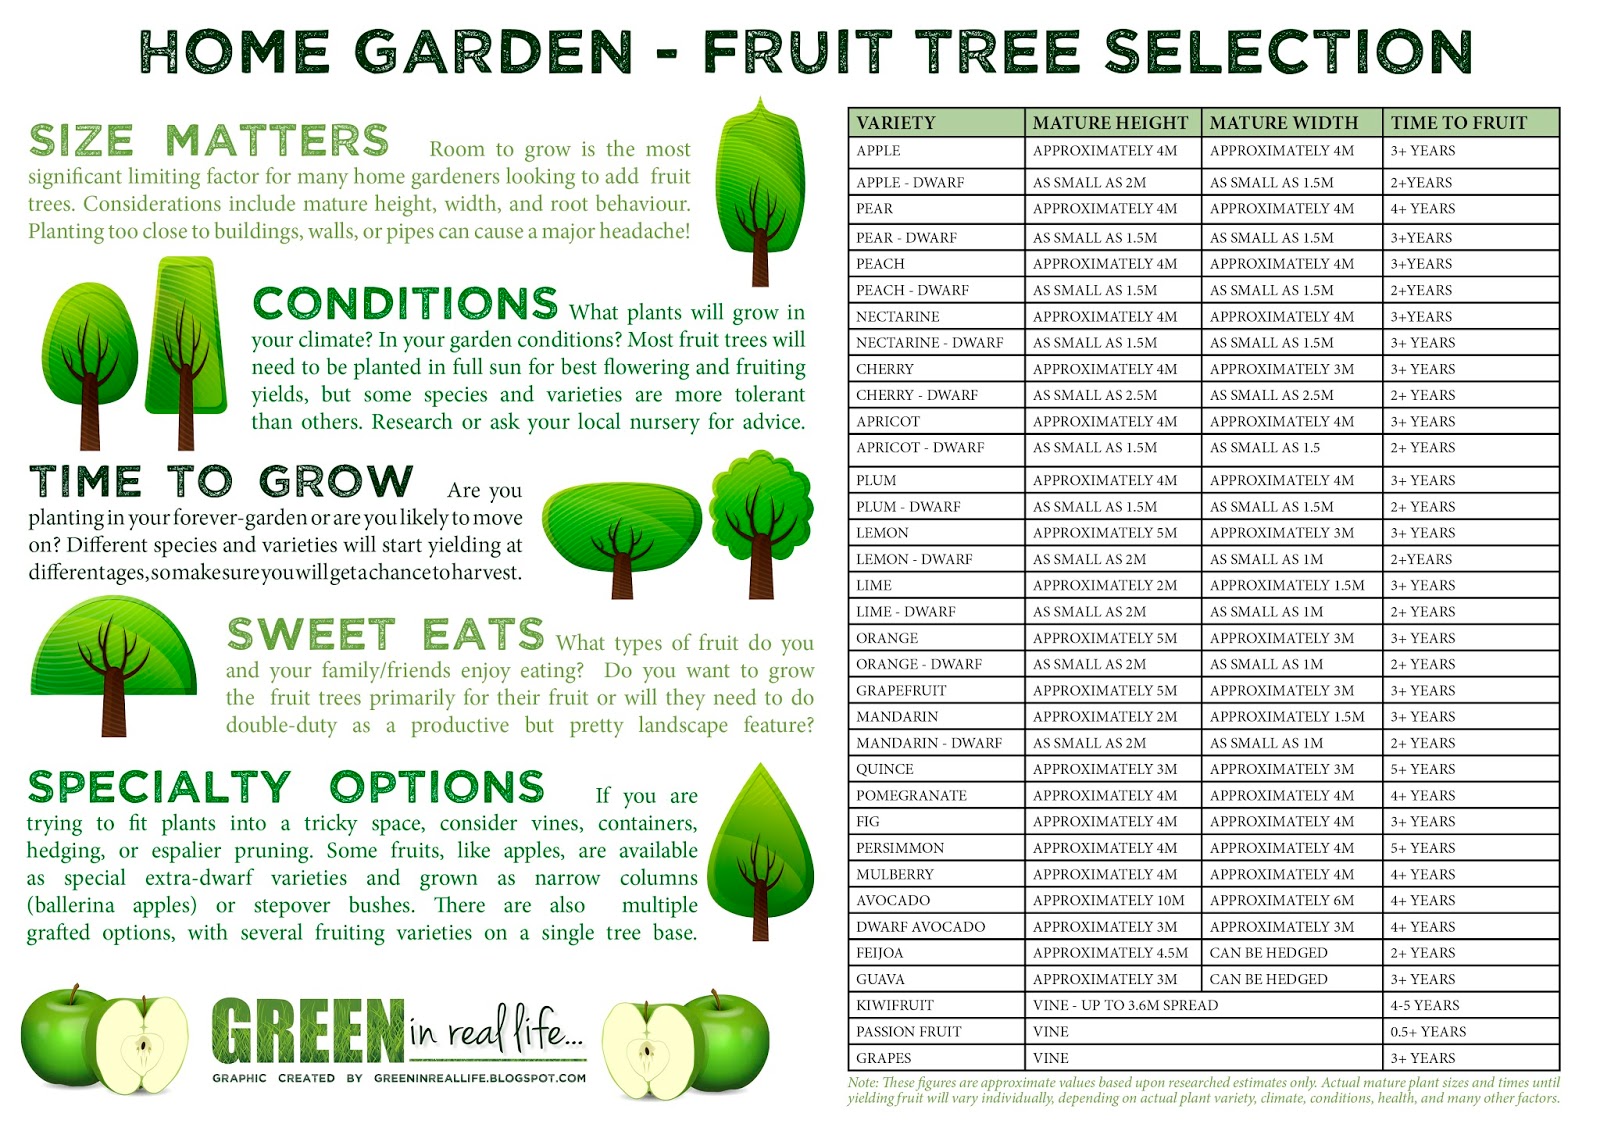 Green in Real Life: Ideas for the Home Garden - Fruit Tree Selection.